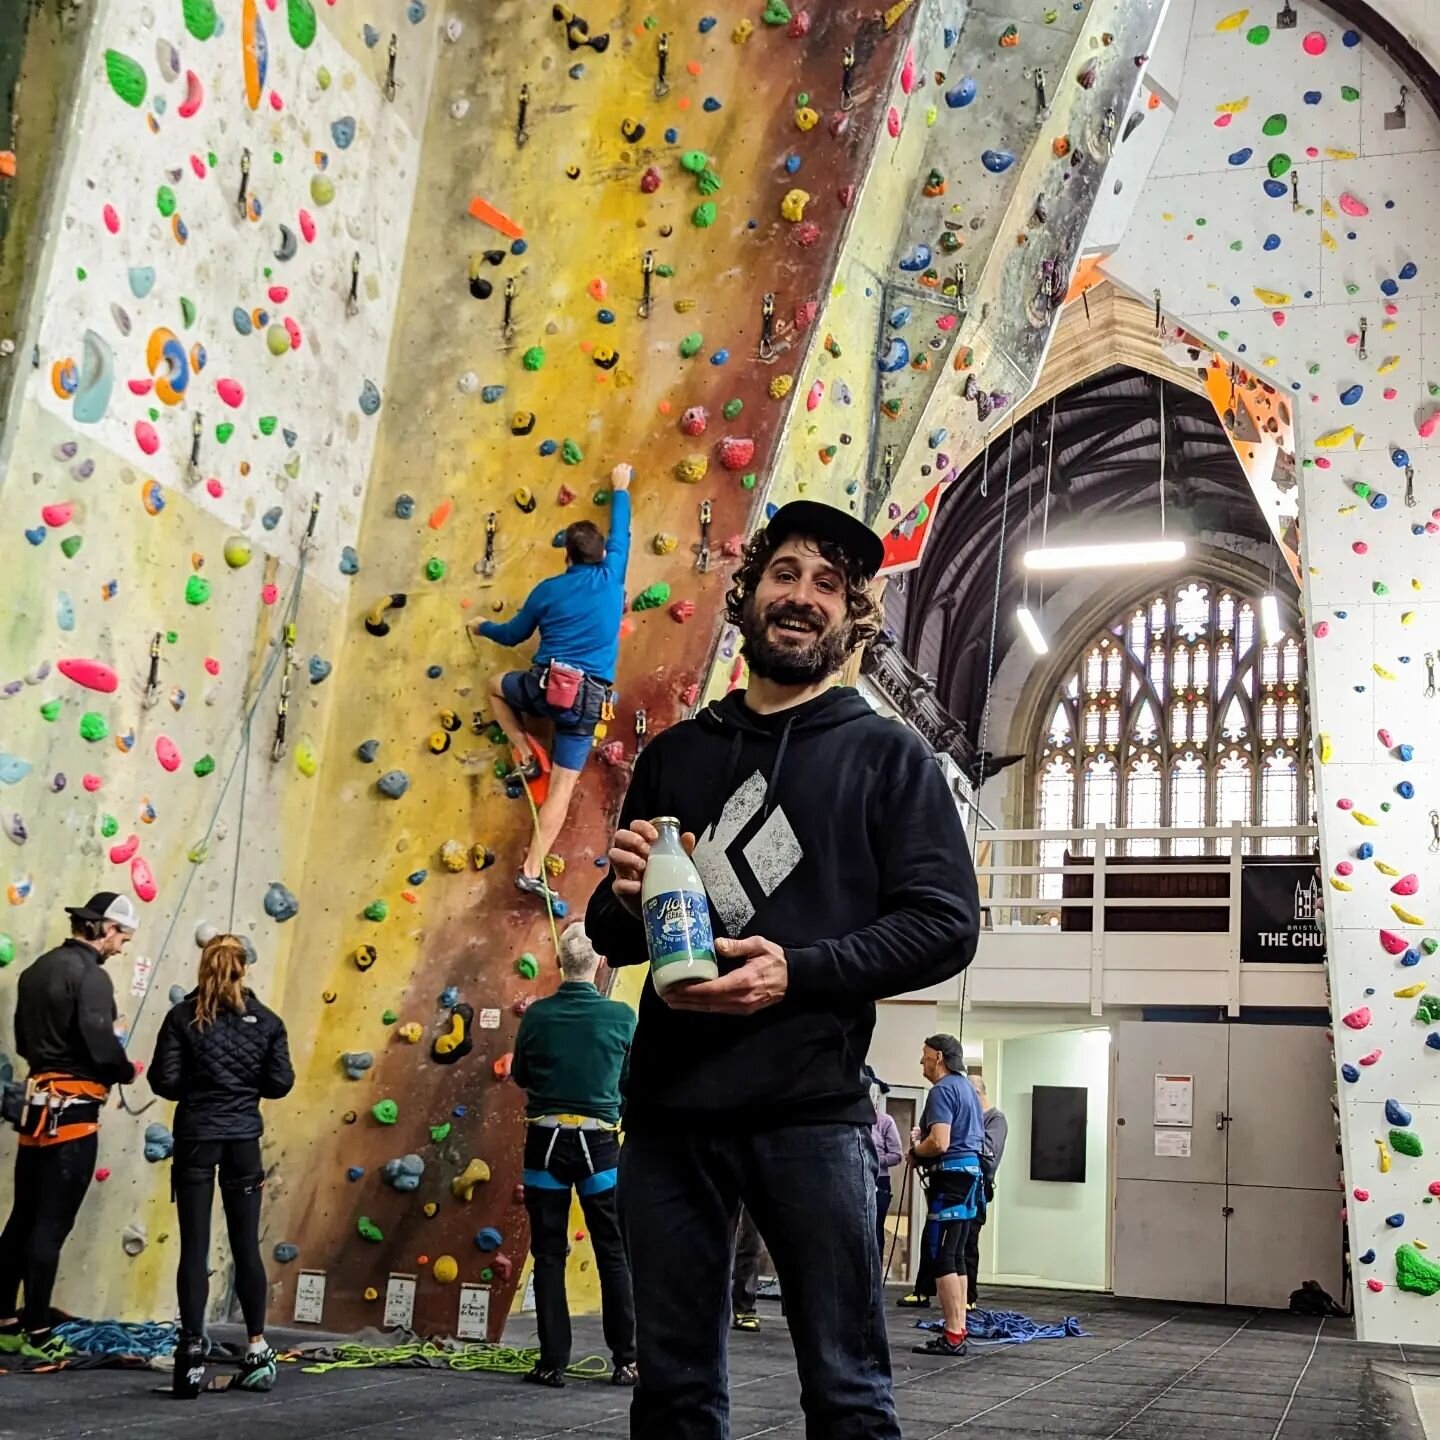 When climbing walls in spectacular indoor settings, you may have a challenging route that you need to muse over with a tea or coffee. That is why @tca_thechurch has a cafe inside! We are now supplying them with weekly deliveries of zero-waste oatmilk